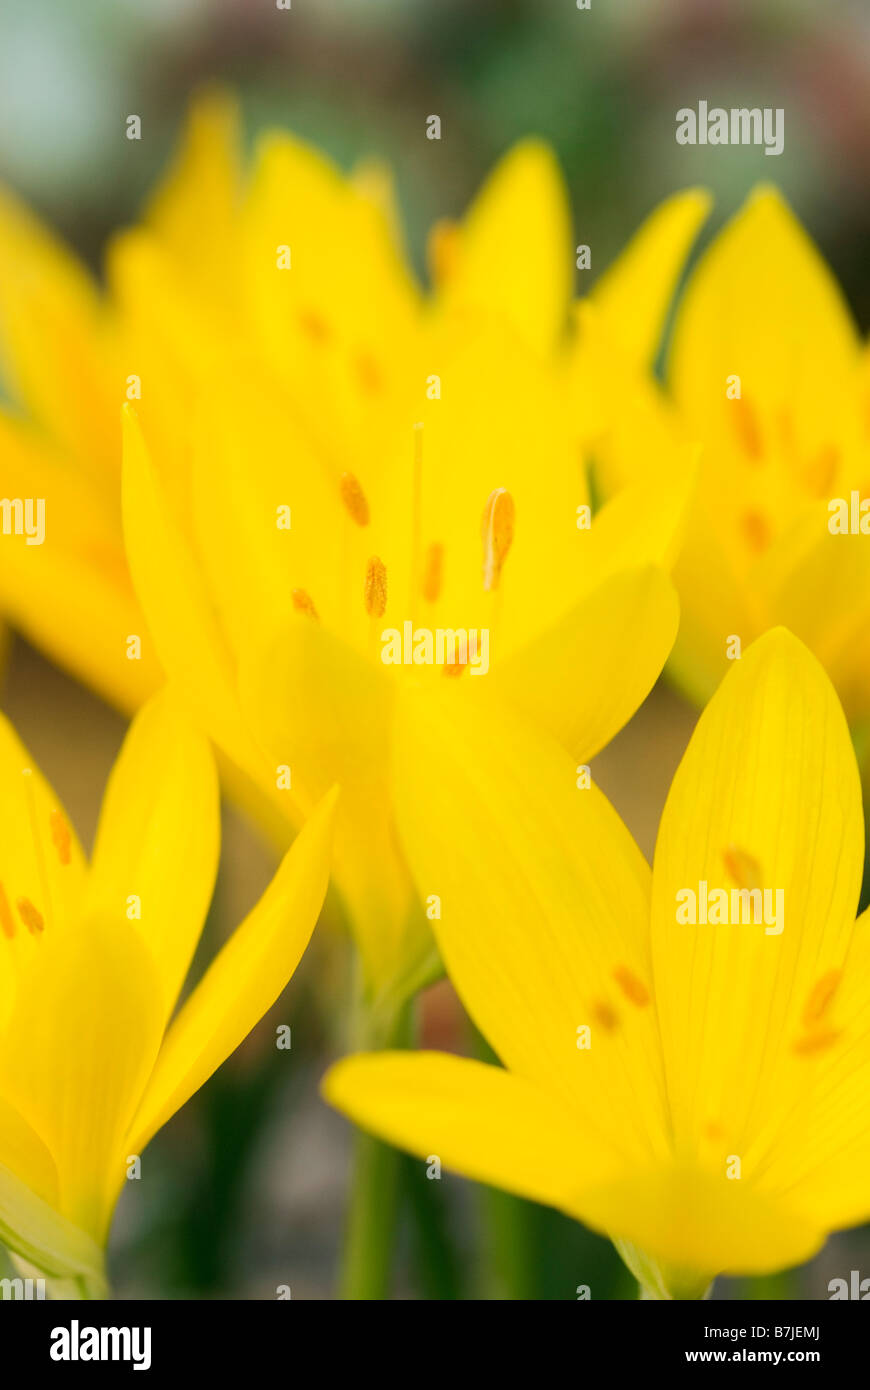 STERNBERGIA LUTEA WINTER OR AUTUMN DAFFODIL GROWING IN AN ALPINE HOUSE Stock Photo